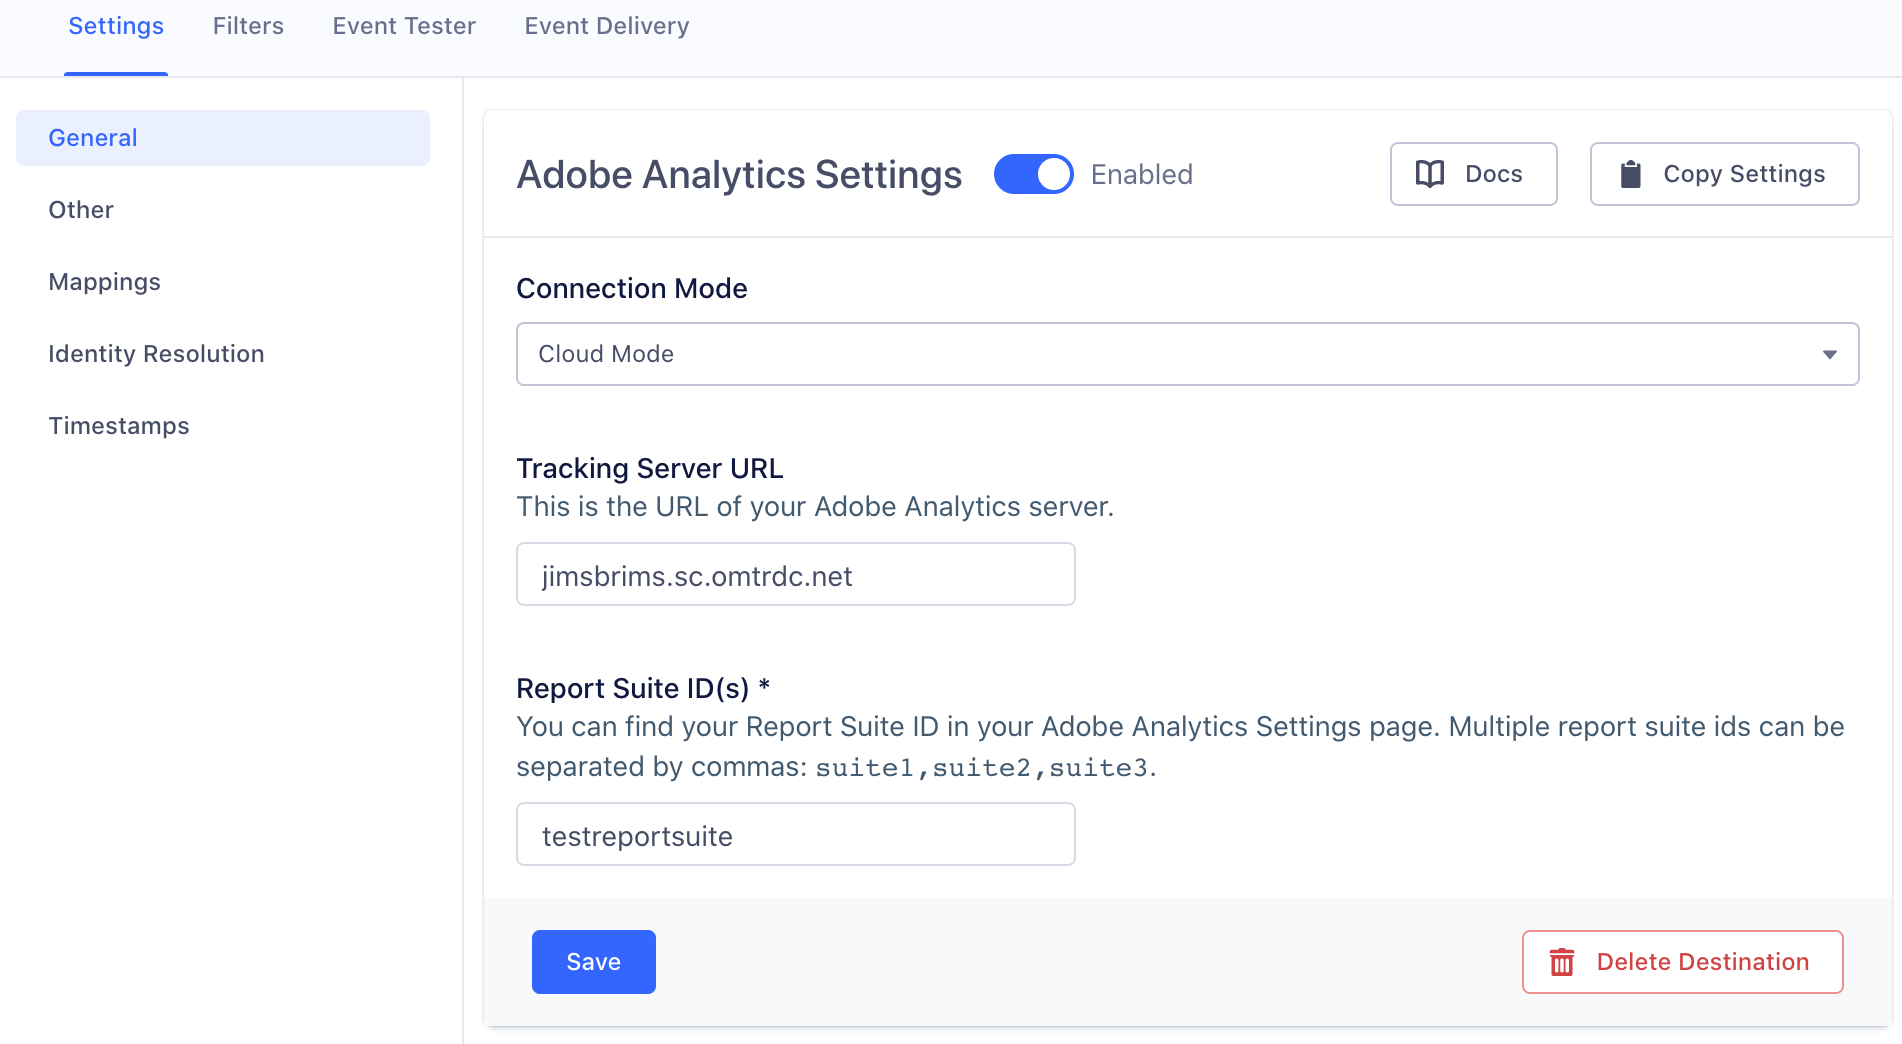 The Adobe Analytics settings page in Segment, with the General section selected.